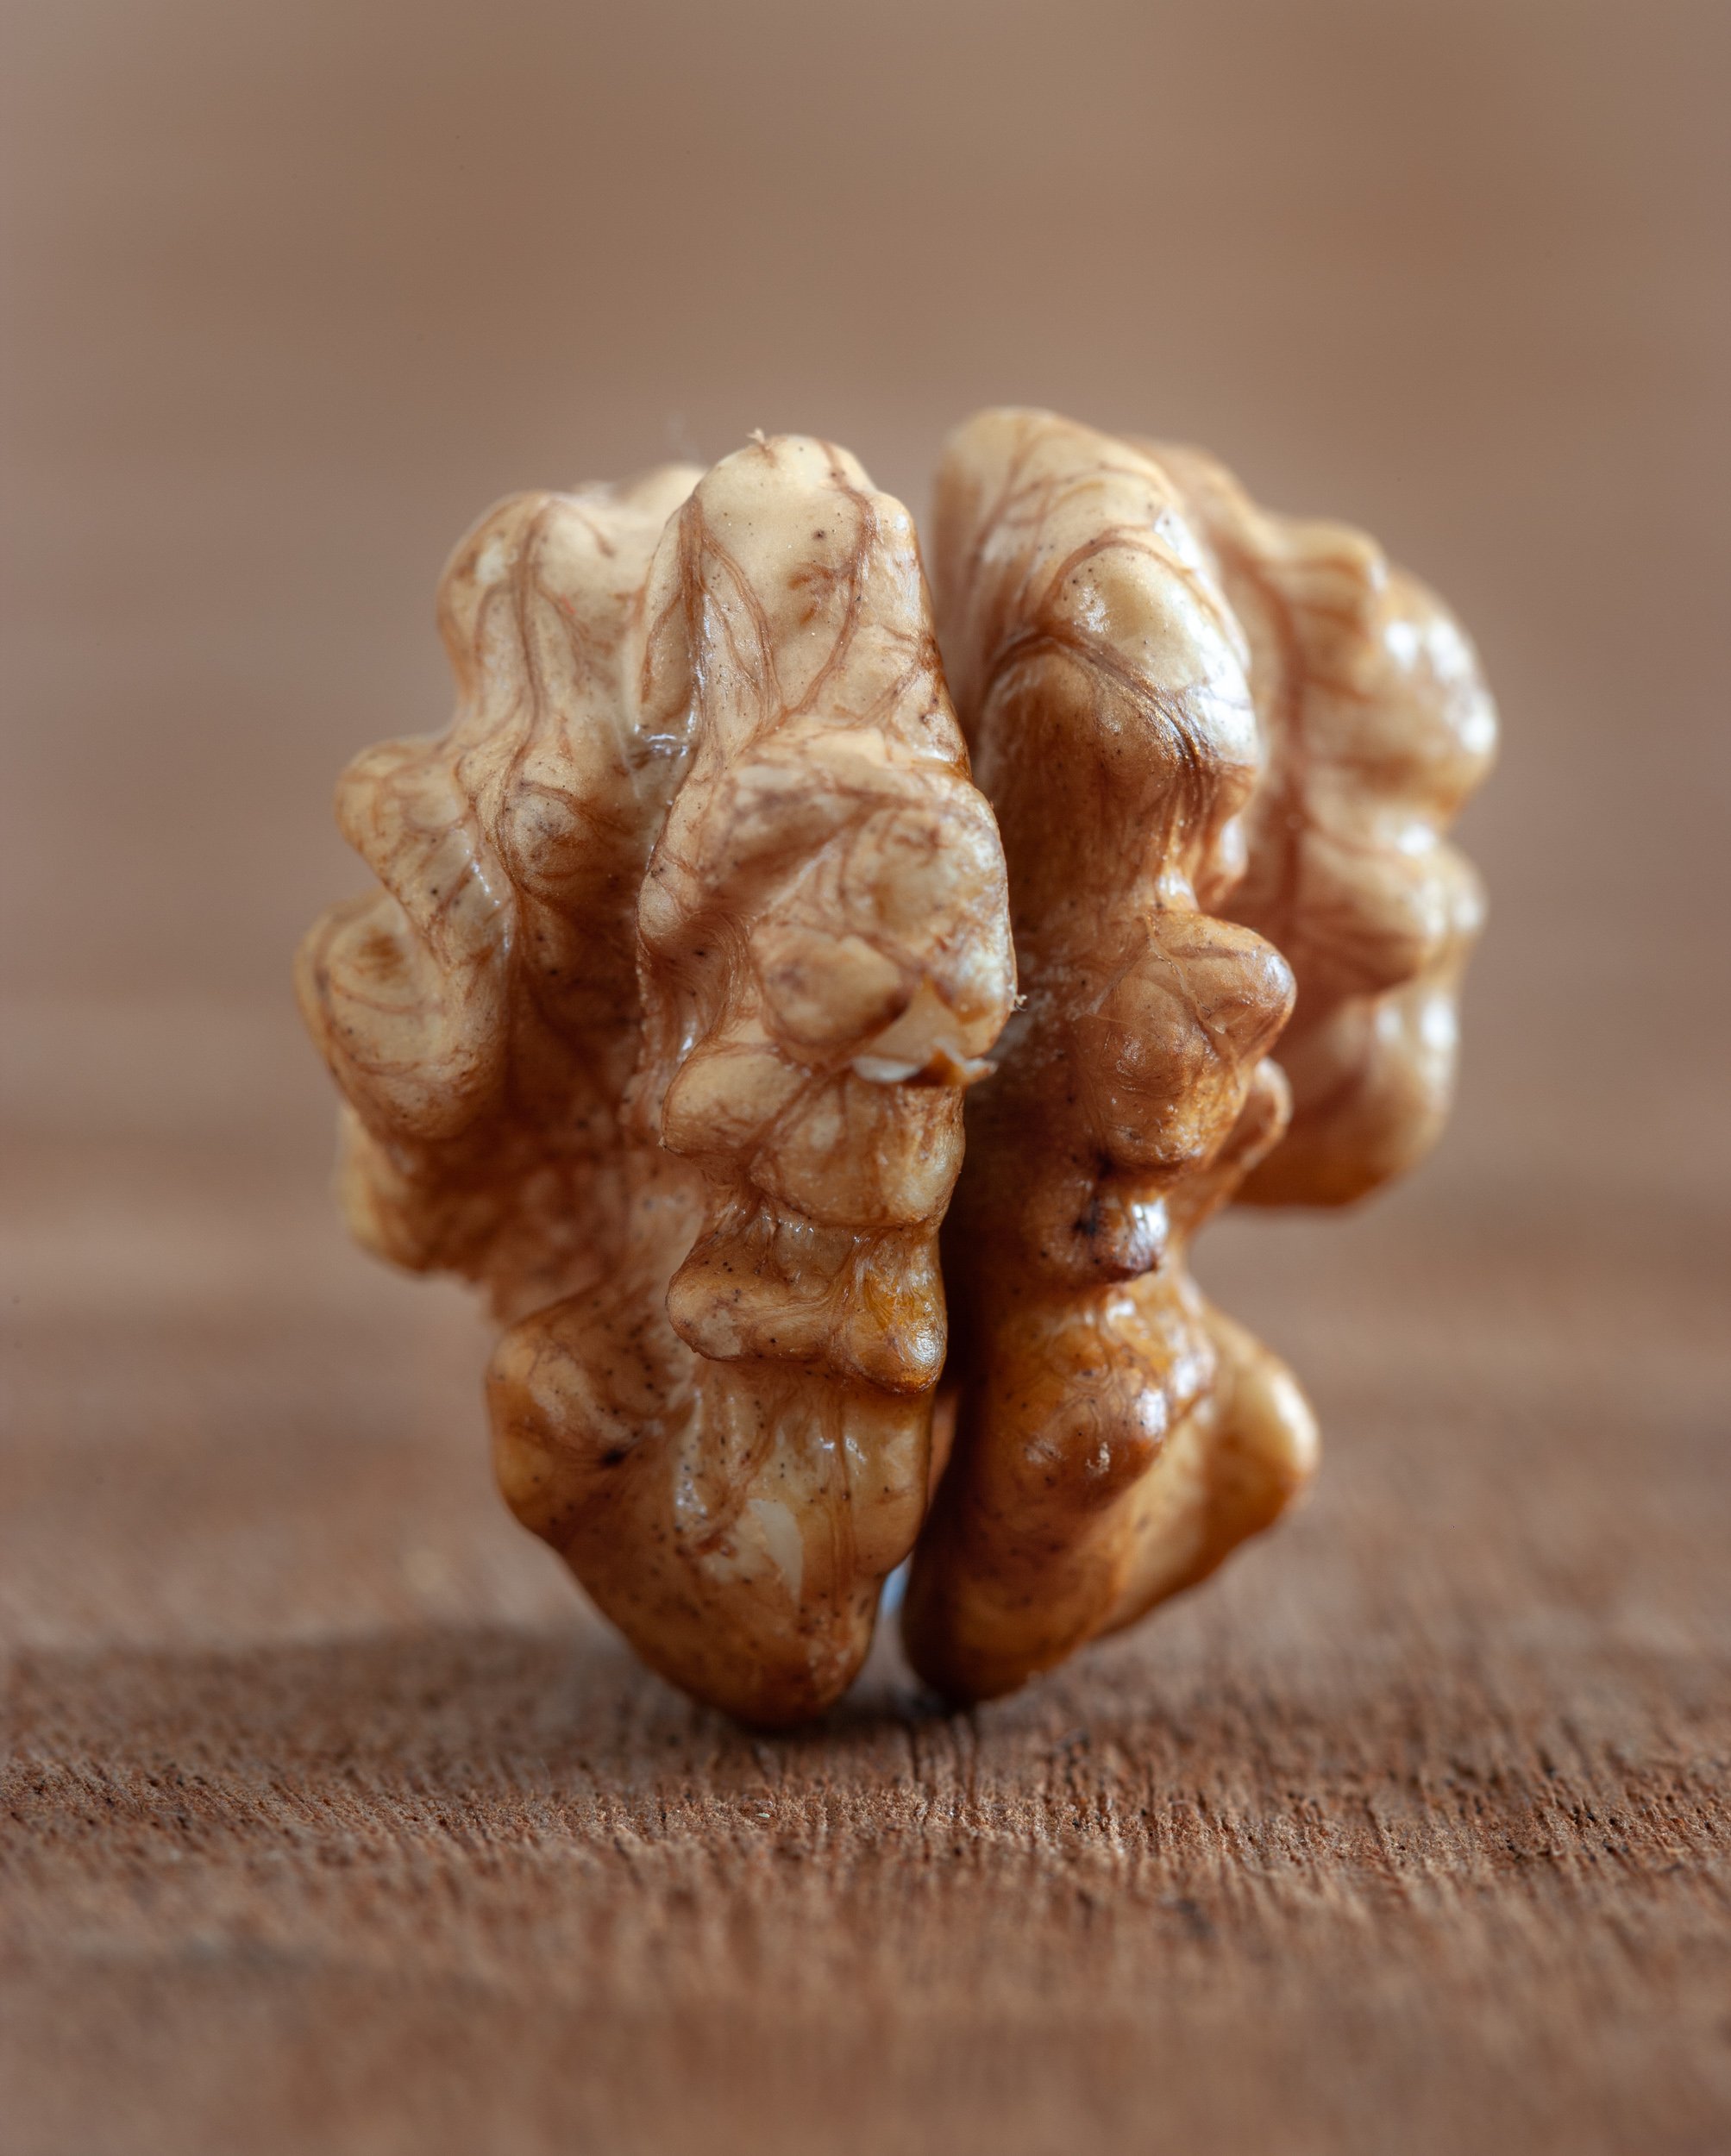 the fruit of the walnut without shell